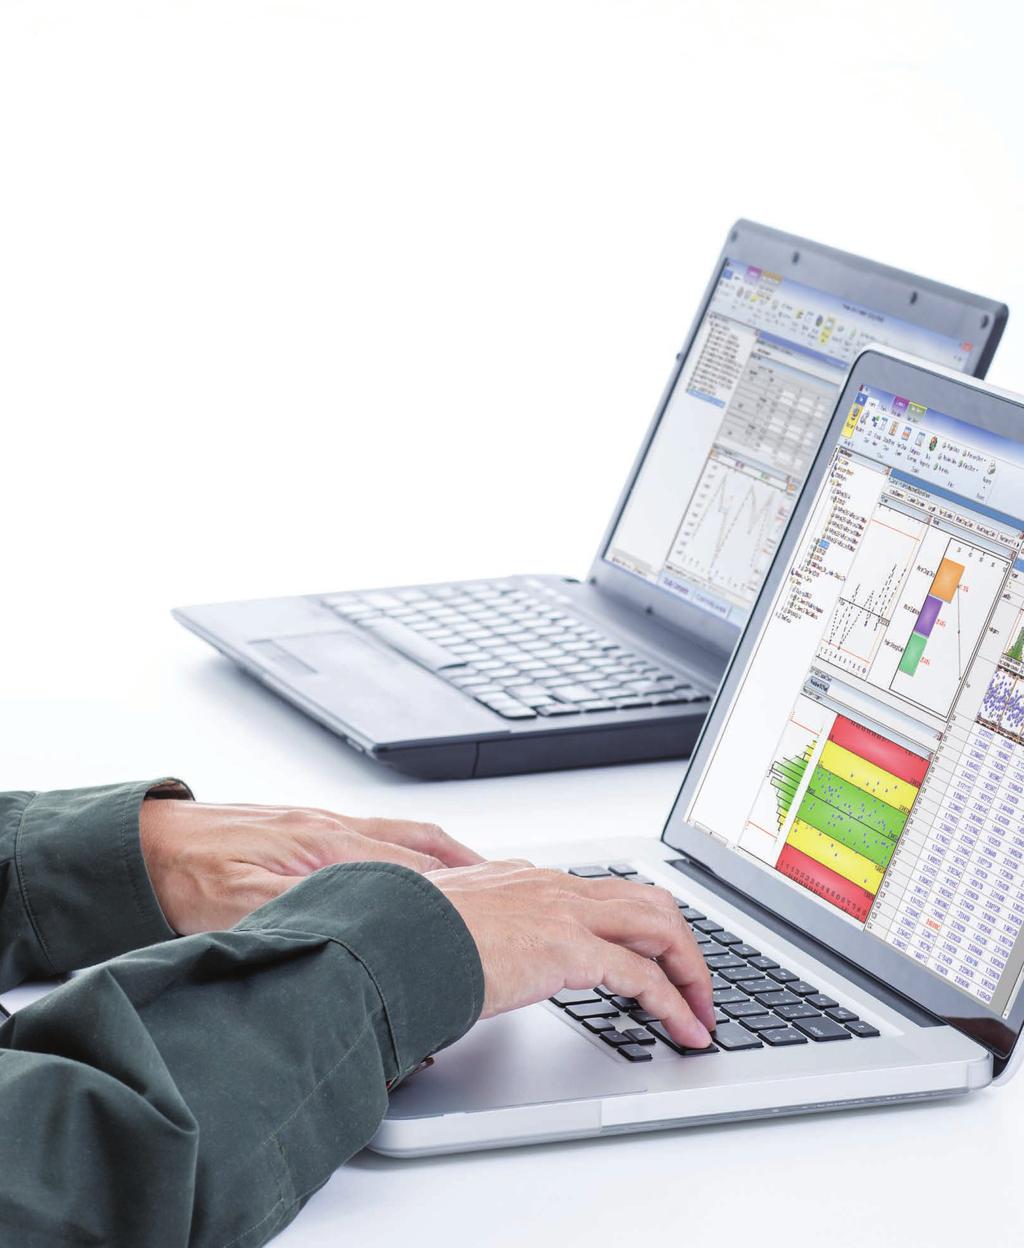 GET MEASURLINK 8 SOFTWARE! MeasurLink is an easy-to-use, data collection and real-time statistical process control suite.